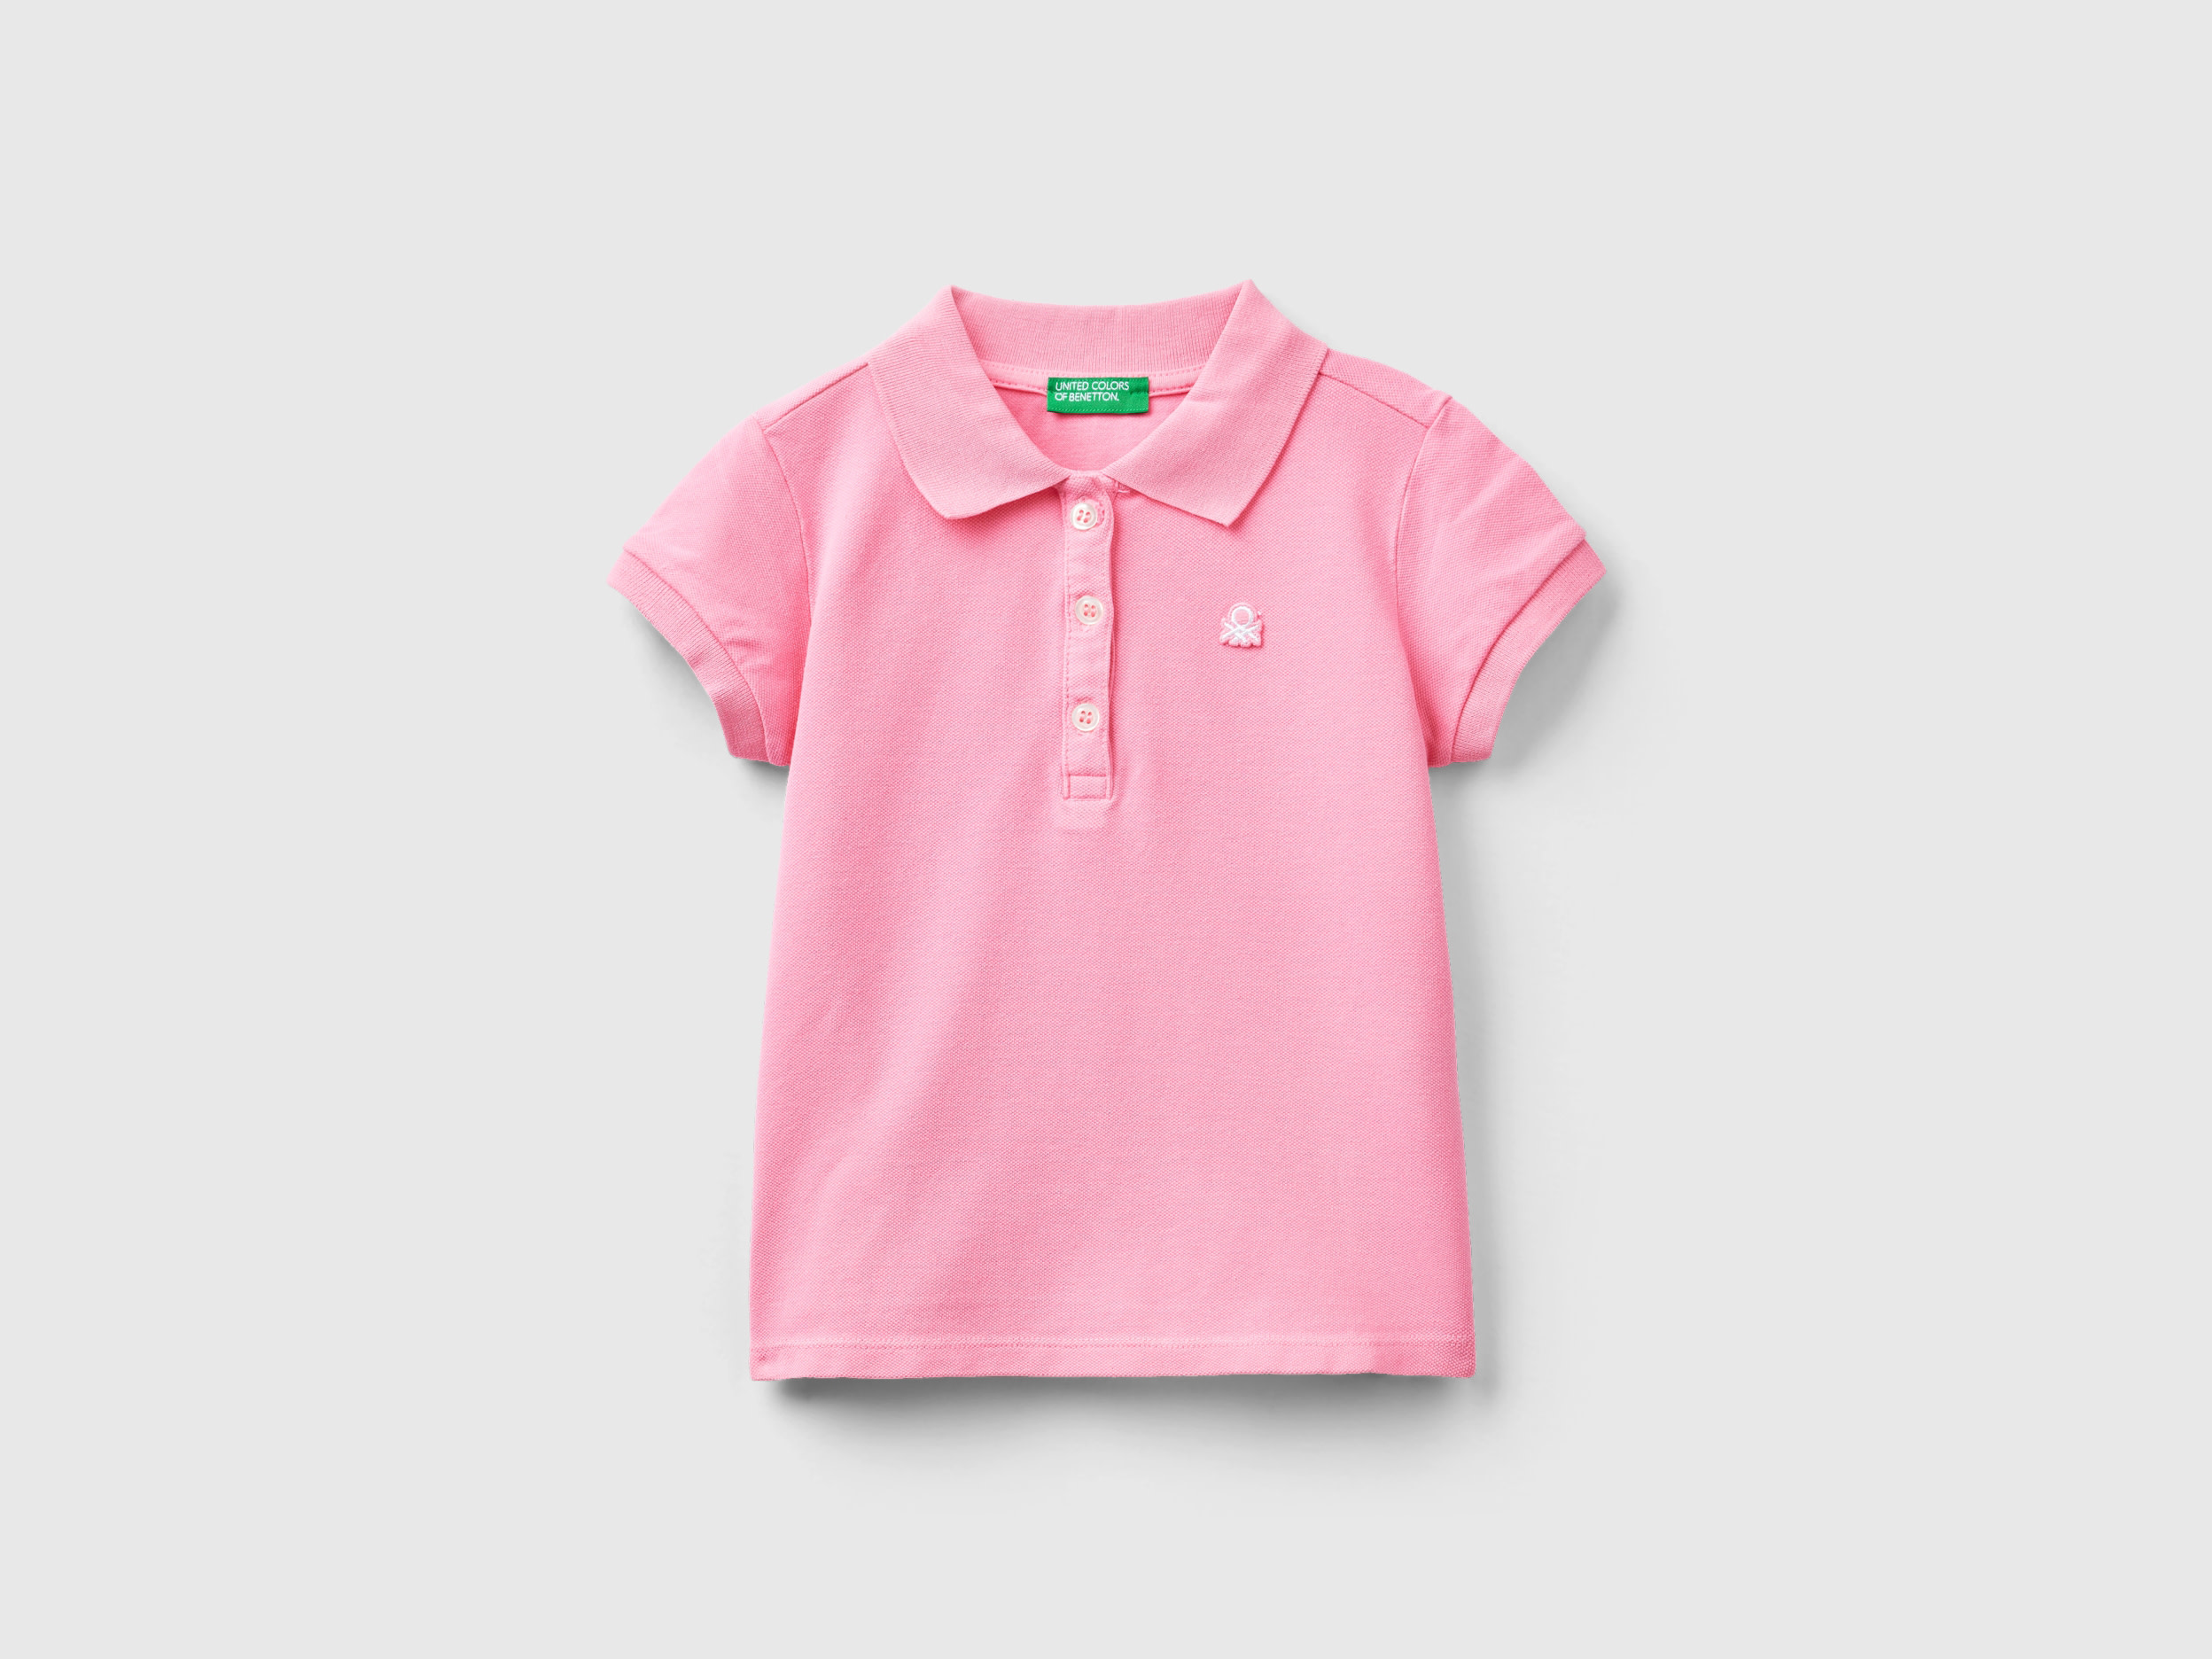 Image of Benetton, Regular Fit Polo In Organic Cotton, size 104, Pink, Kids